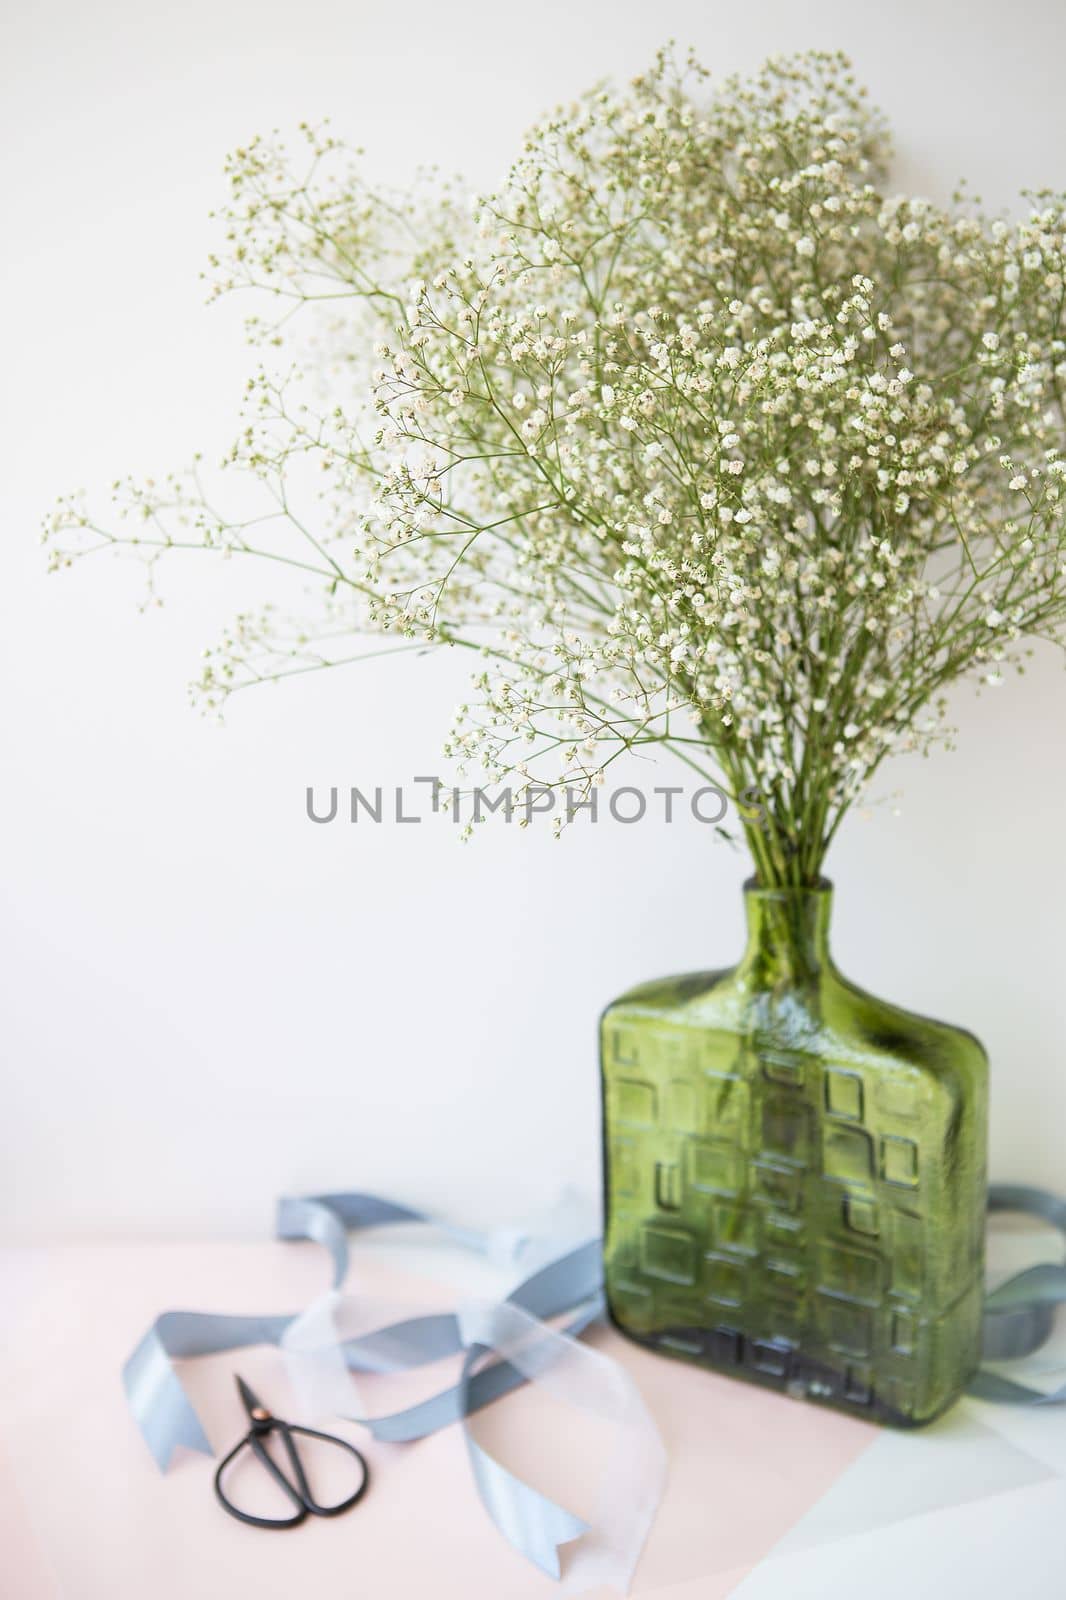 Preparing the bouquet for the wedding ceremony, a bouquet of white gypsophila flowers stands in a green vase along with ribbons and scissors